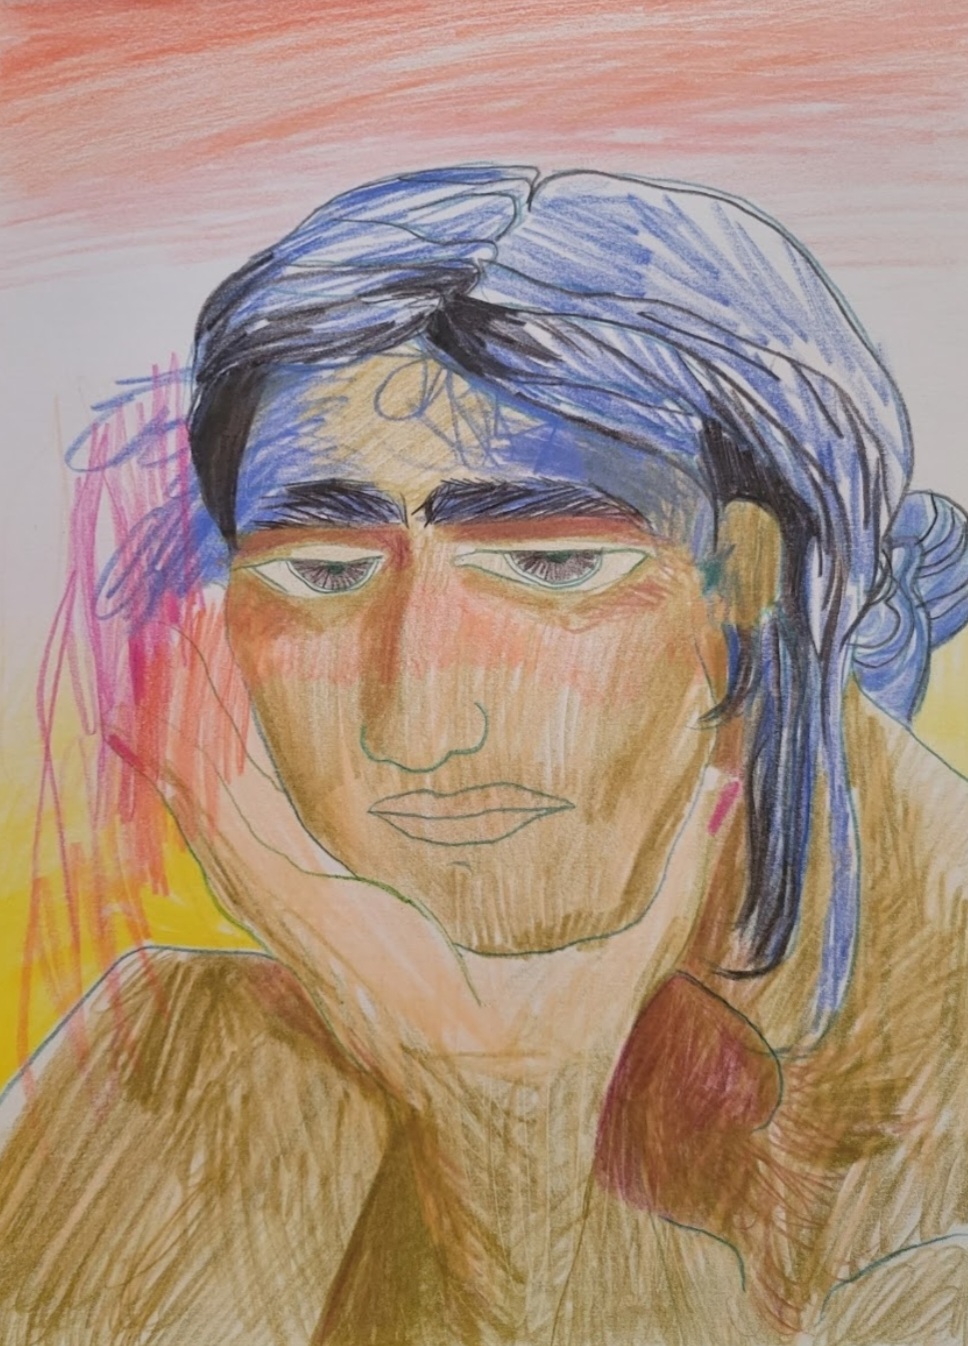 a scribbly colored pencil drawing of a brown-skinned person with thick eyebrows and blue-black hair in a messy bun. they look directly at the viewer with an apathetic expression, pursed lips and eyes half-open. their head is slumped forward, resting their chin in their hand.